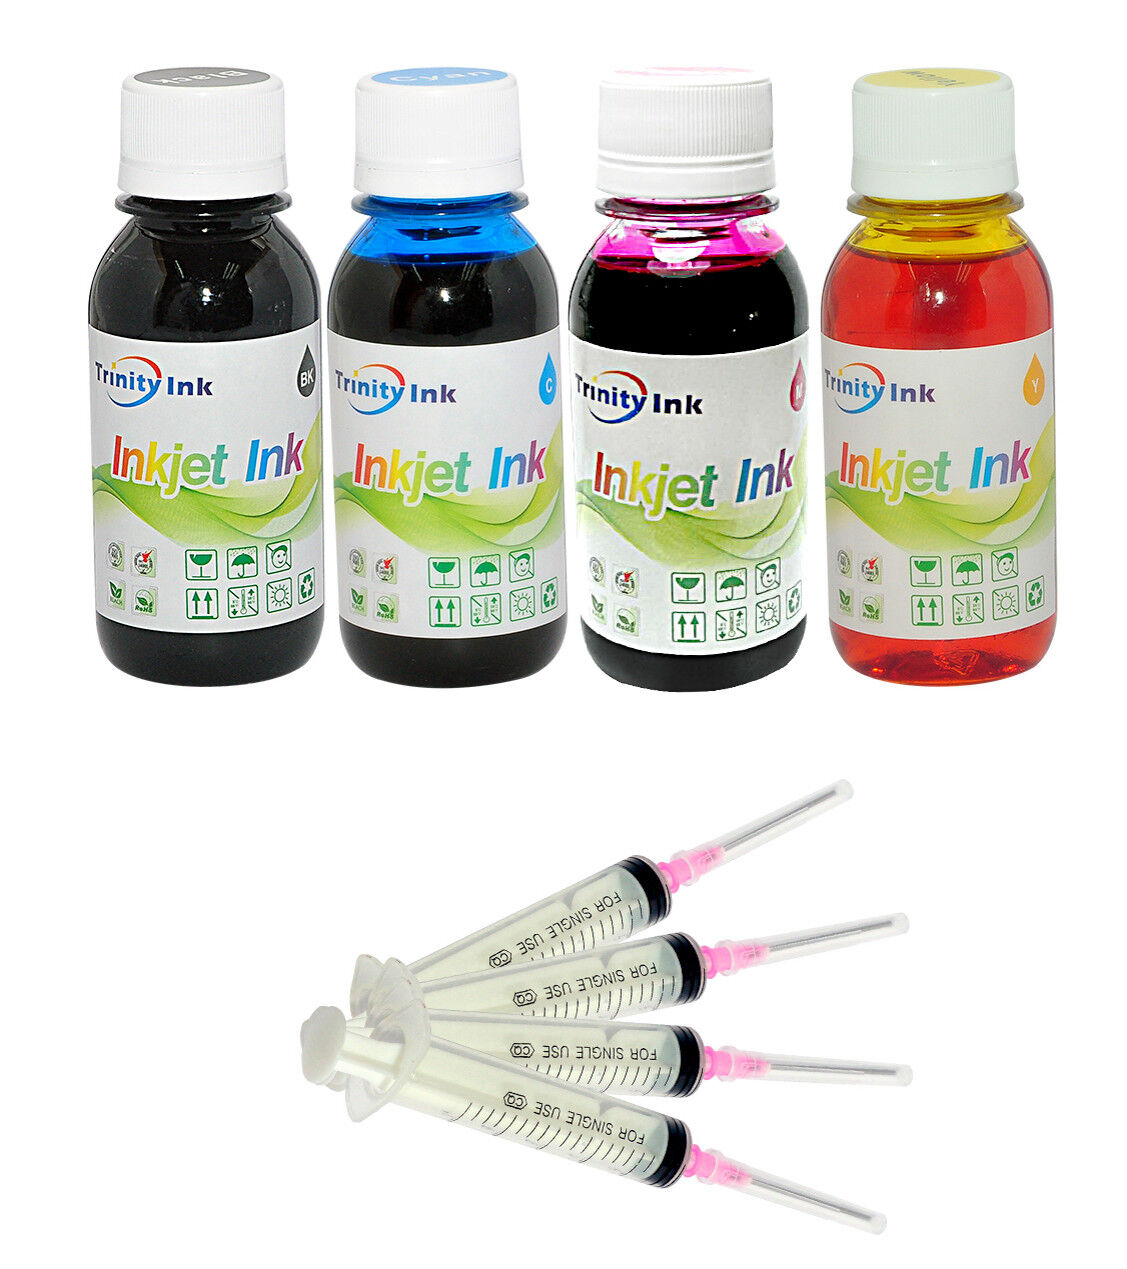 4x100ml Ink for HP ENVY Photo 6252 6255 6258 7155 7158 7164 7855 7858 7864 5542